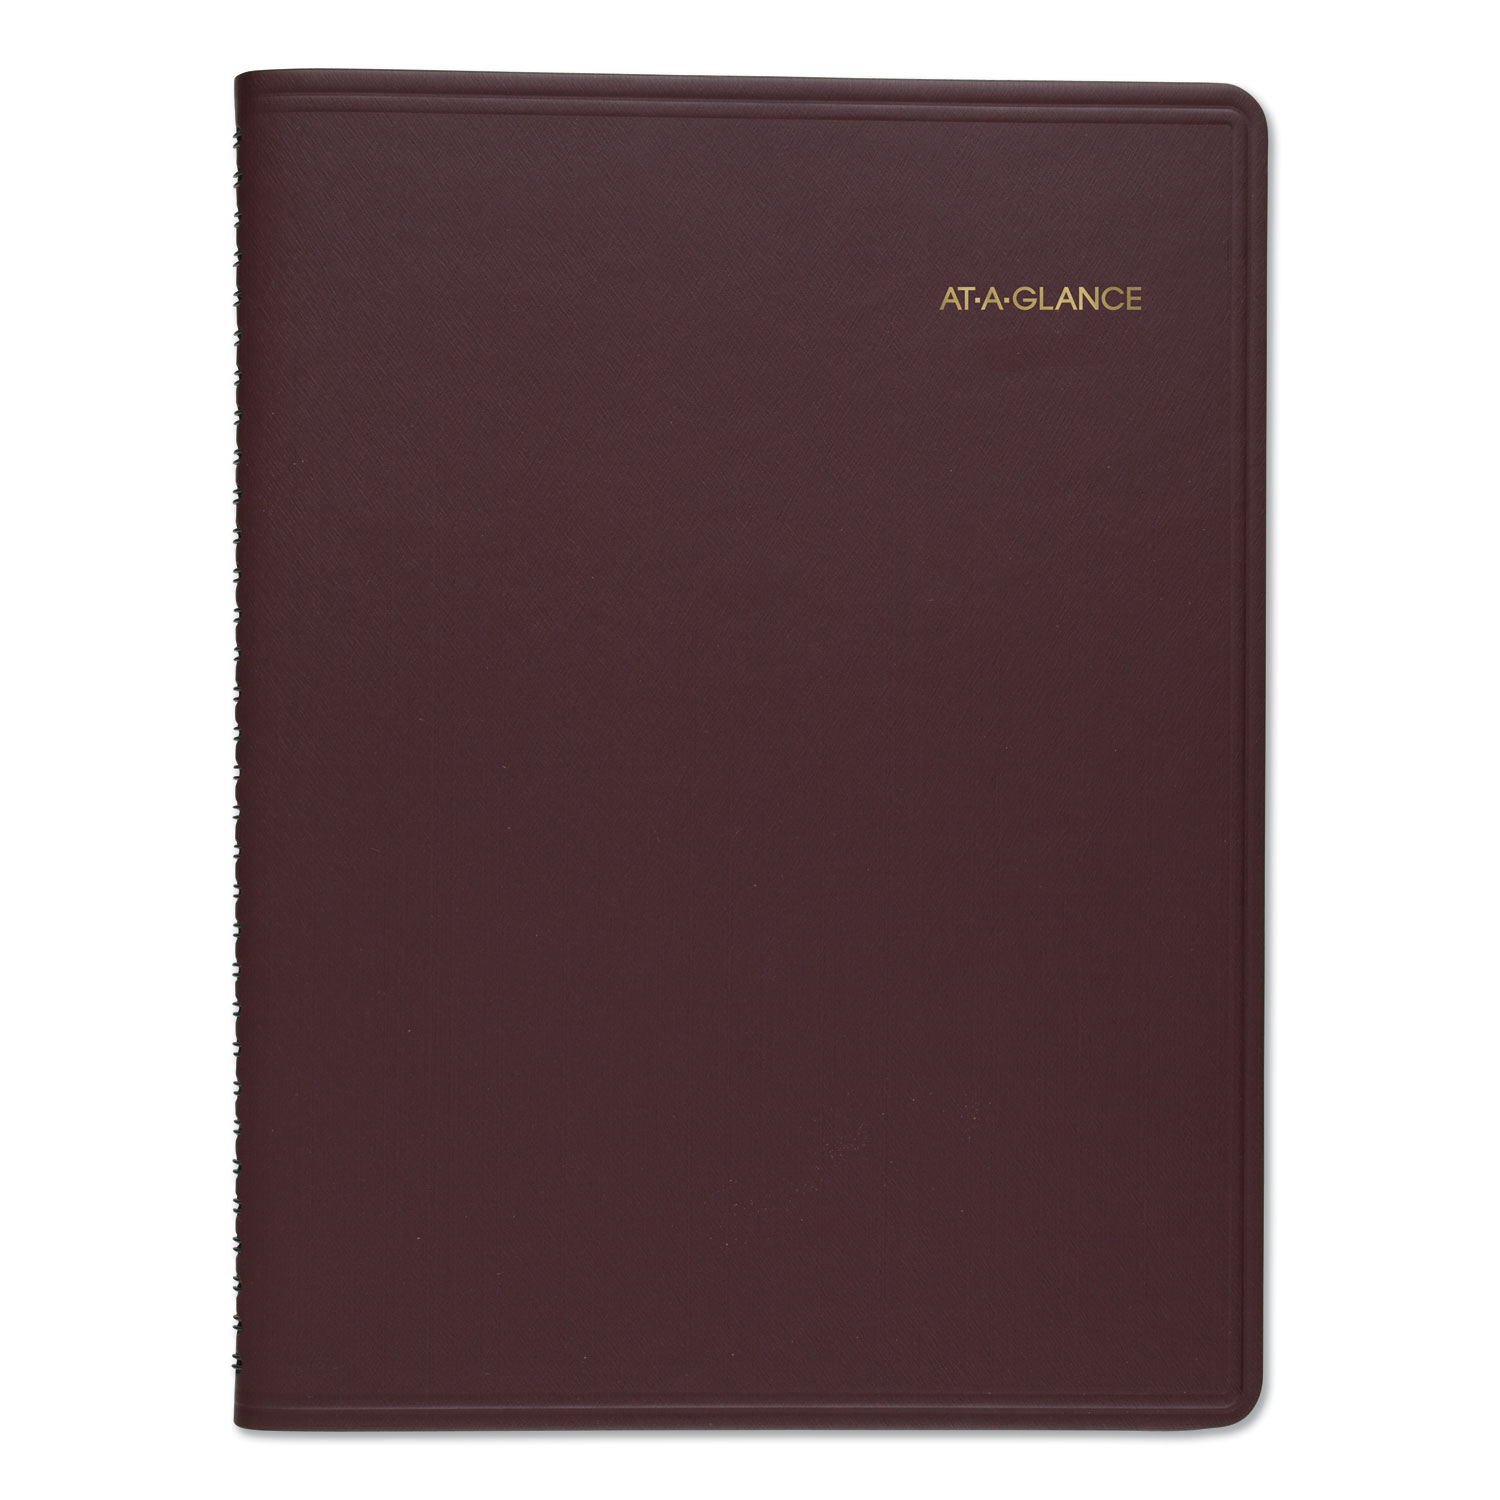  AT-A-GLANCE 7012050 Monthly Planner, 8 3/4 x 6 7/8, Winestone, 2020 (AAG7012050) 